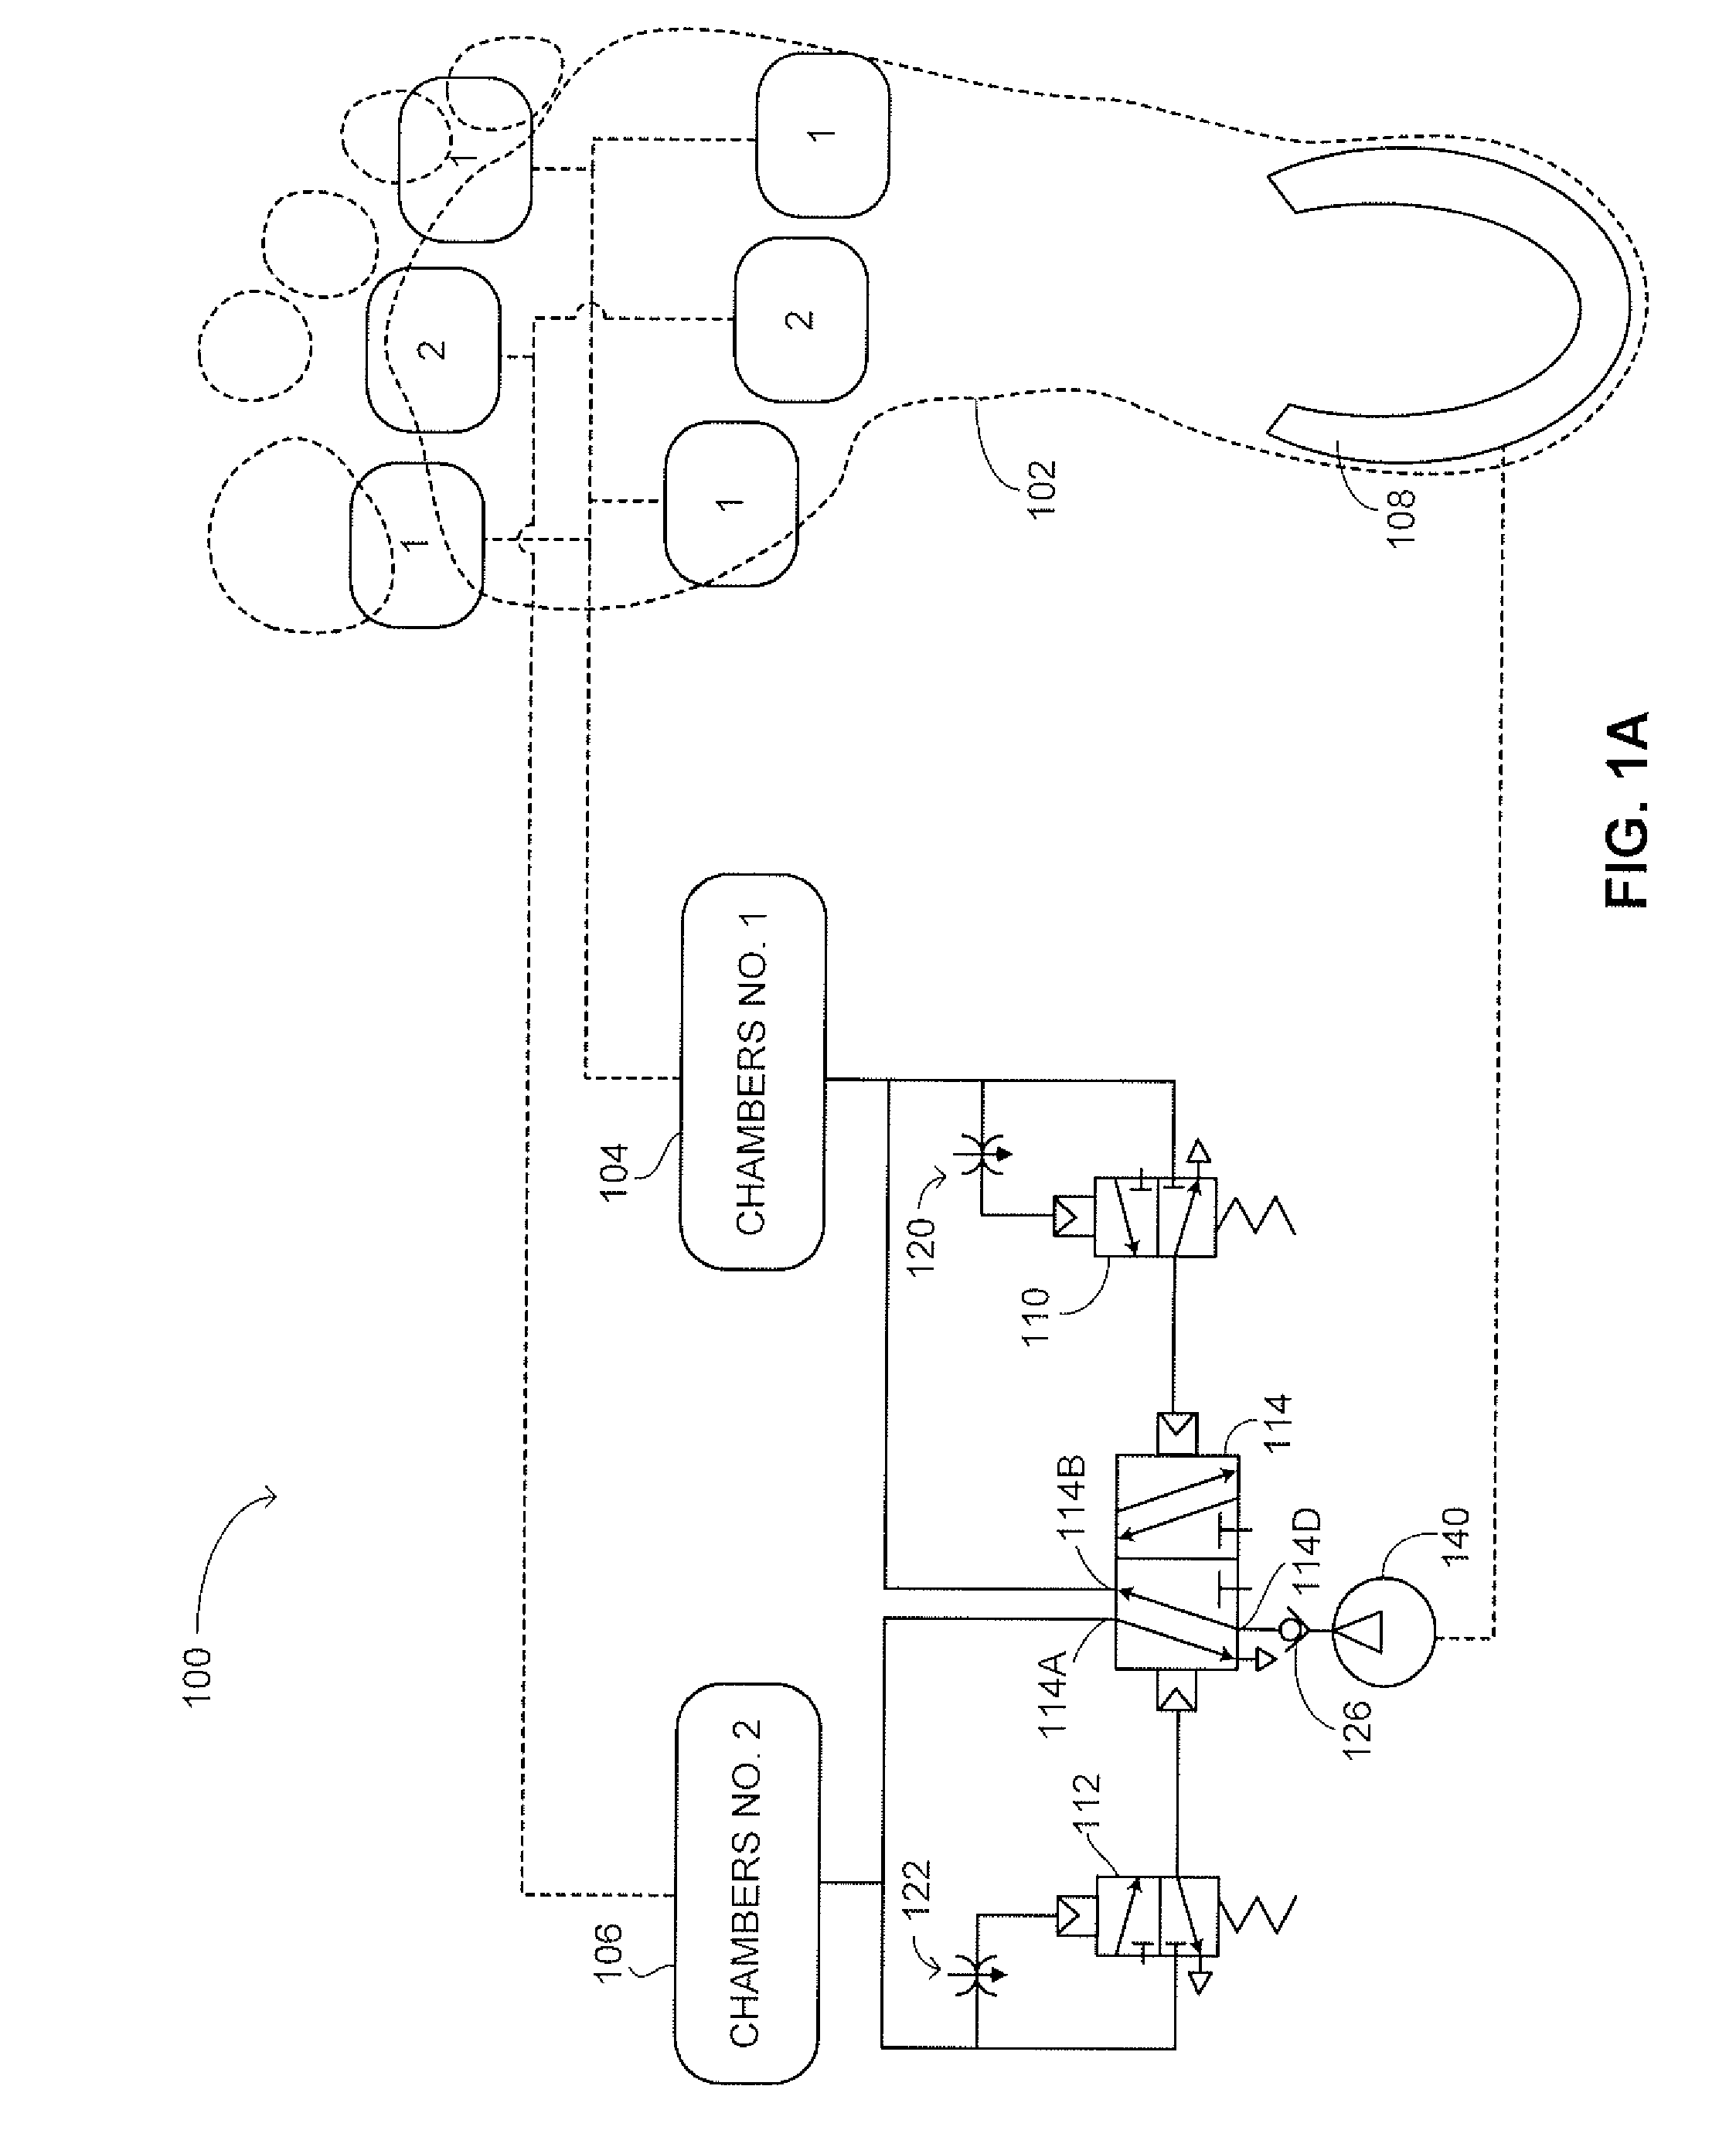 Pneumatic Alternating Pressure Relief of a Foot